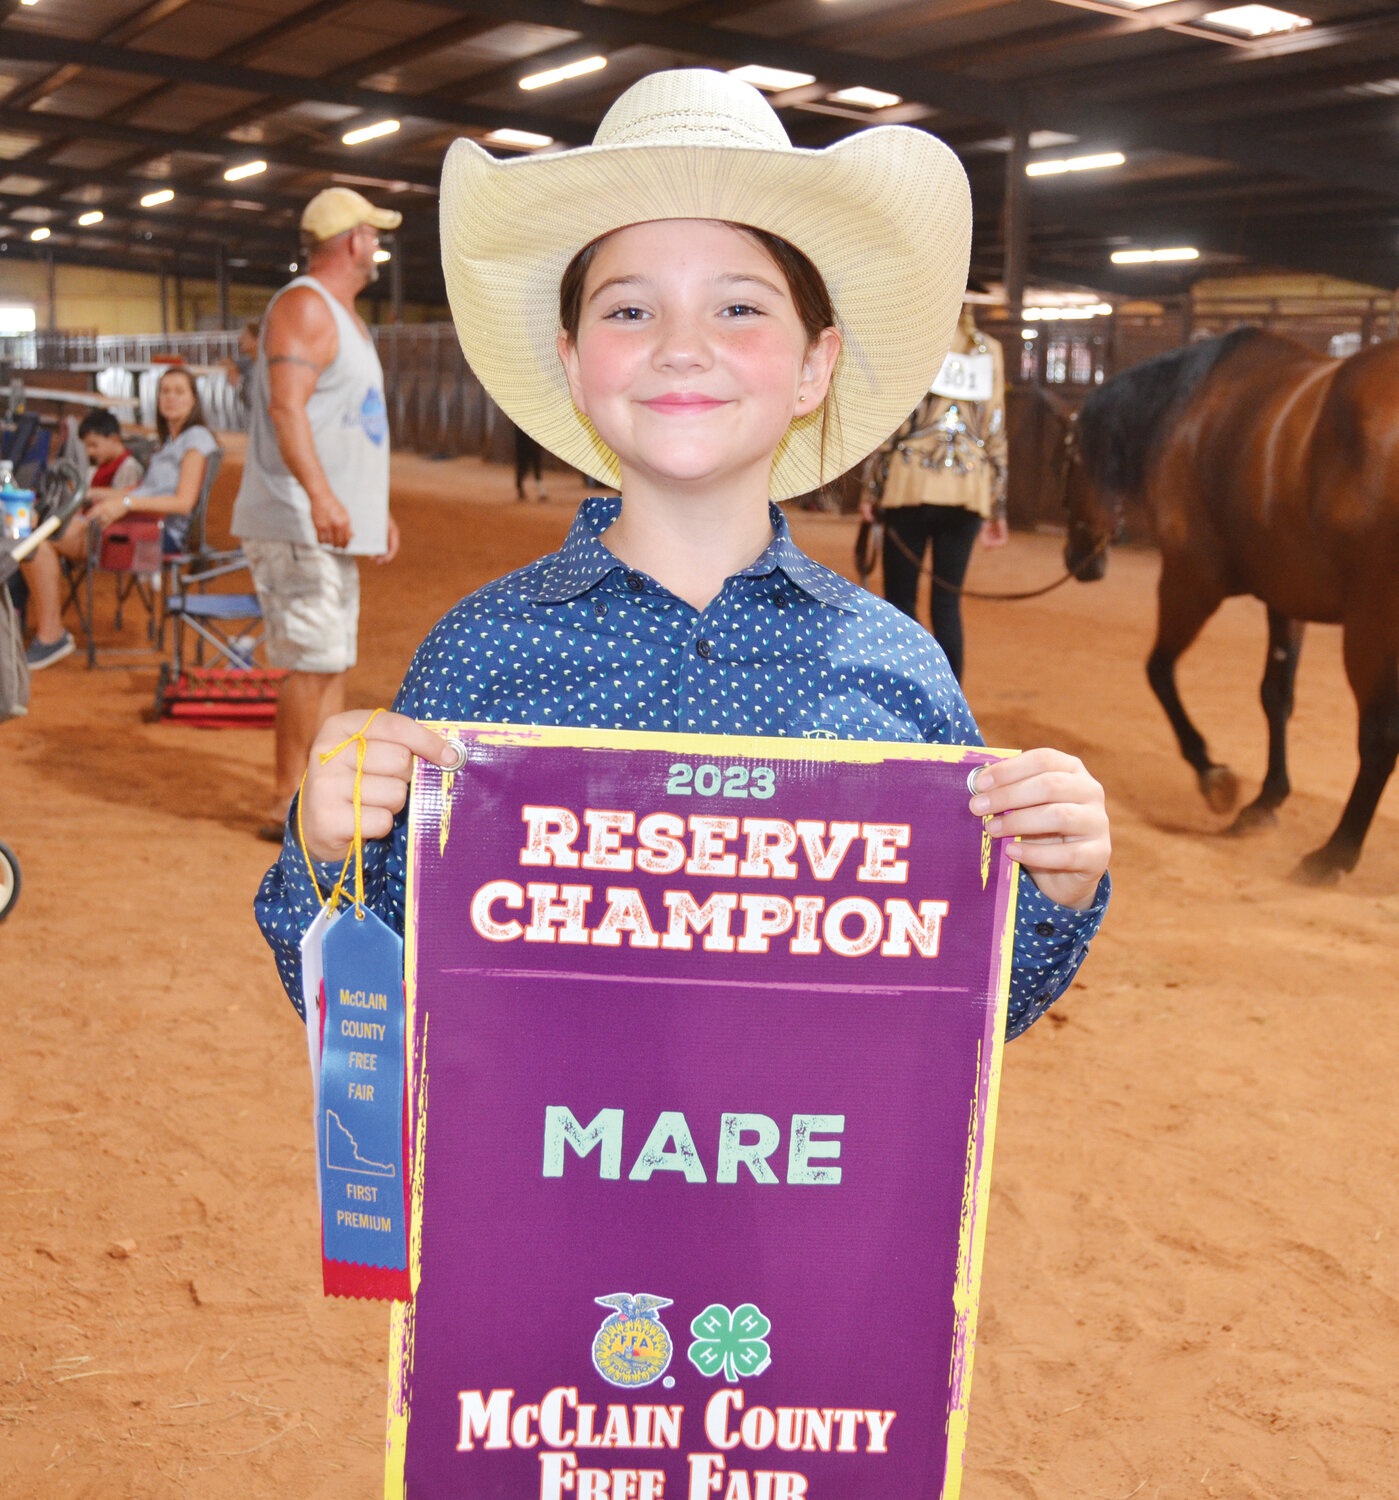 The mare belonging to Nolan Andrews was judged to be the Reserve Grand Champion at last week’s county fair.